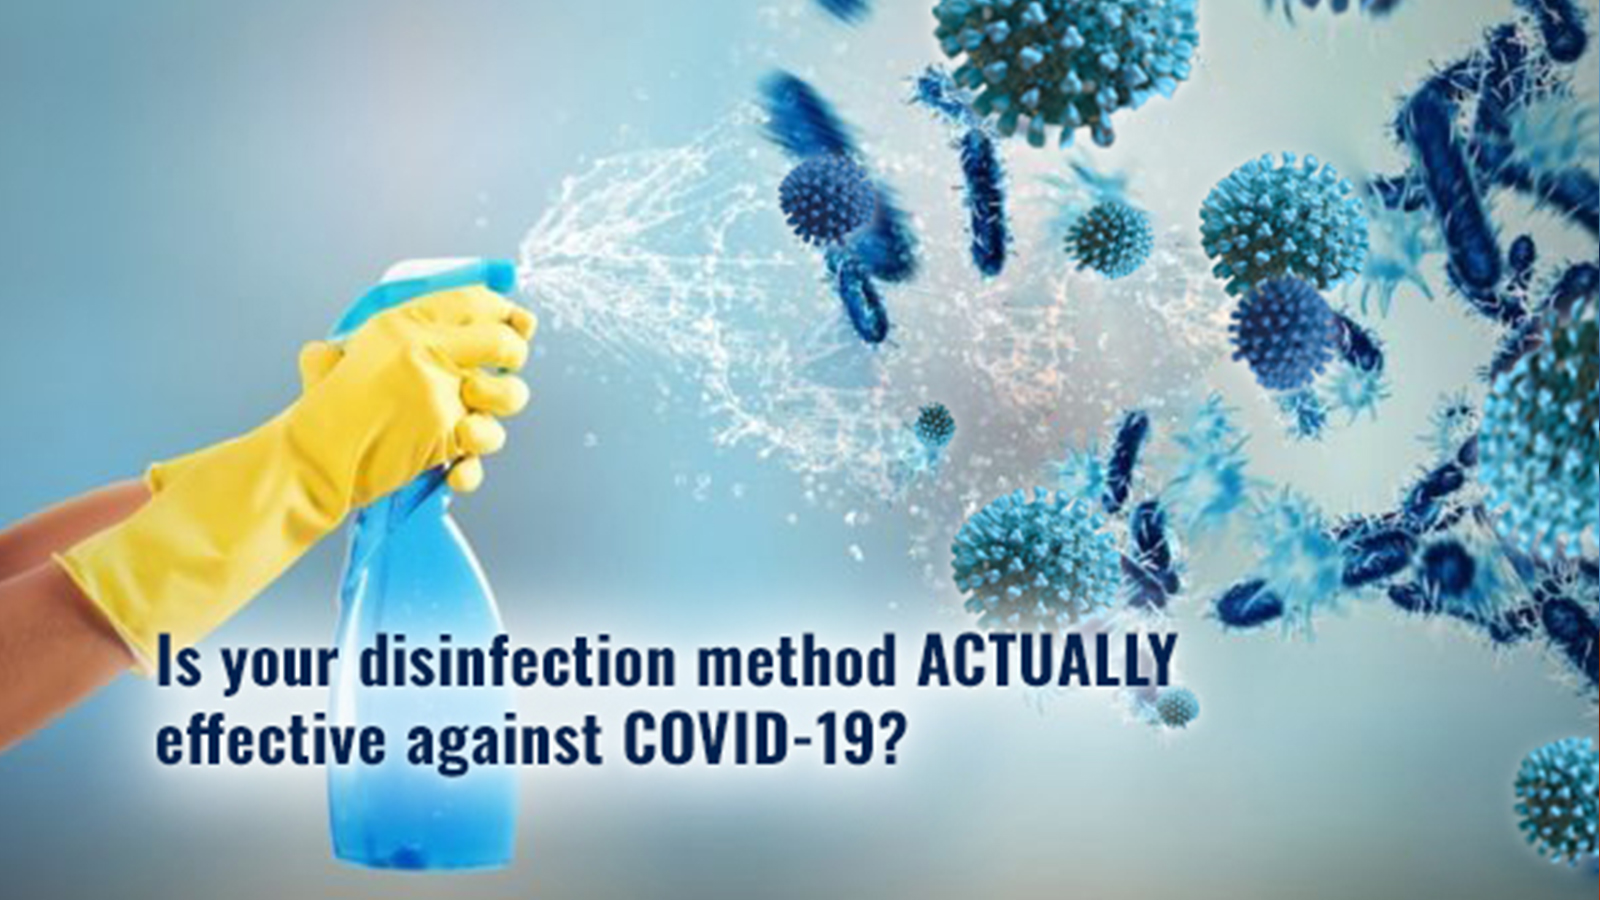 Validating Cleaning of Covid-19